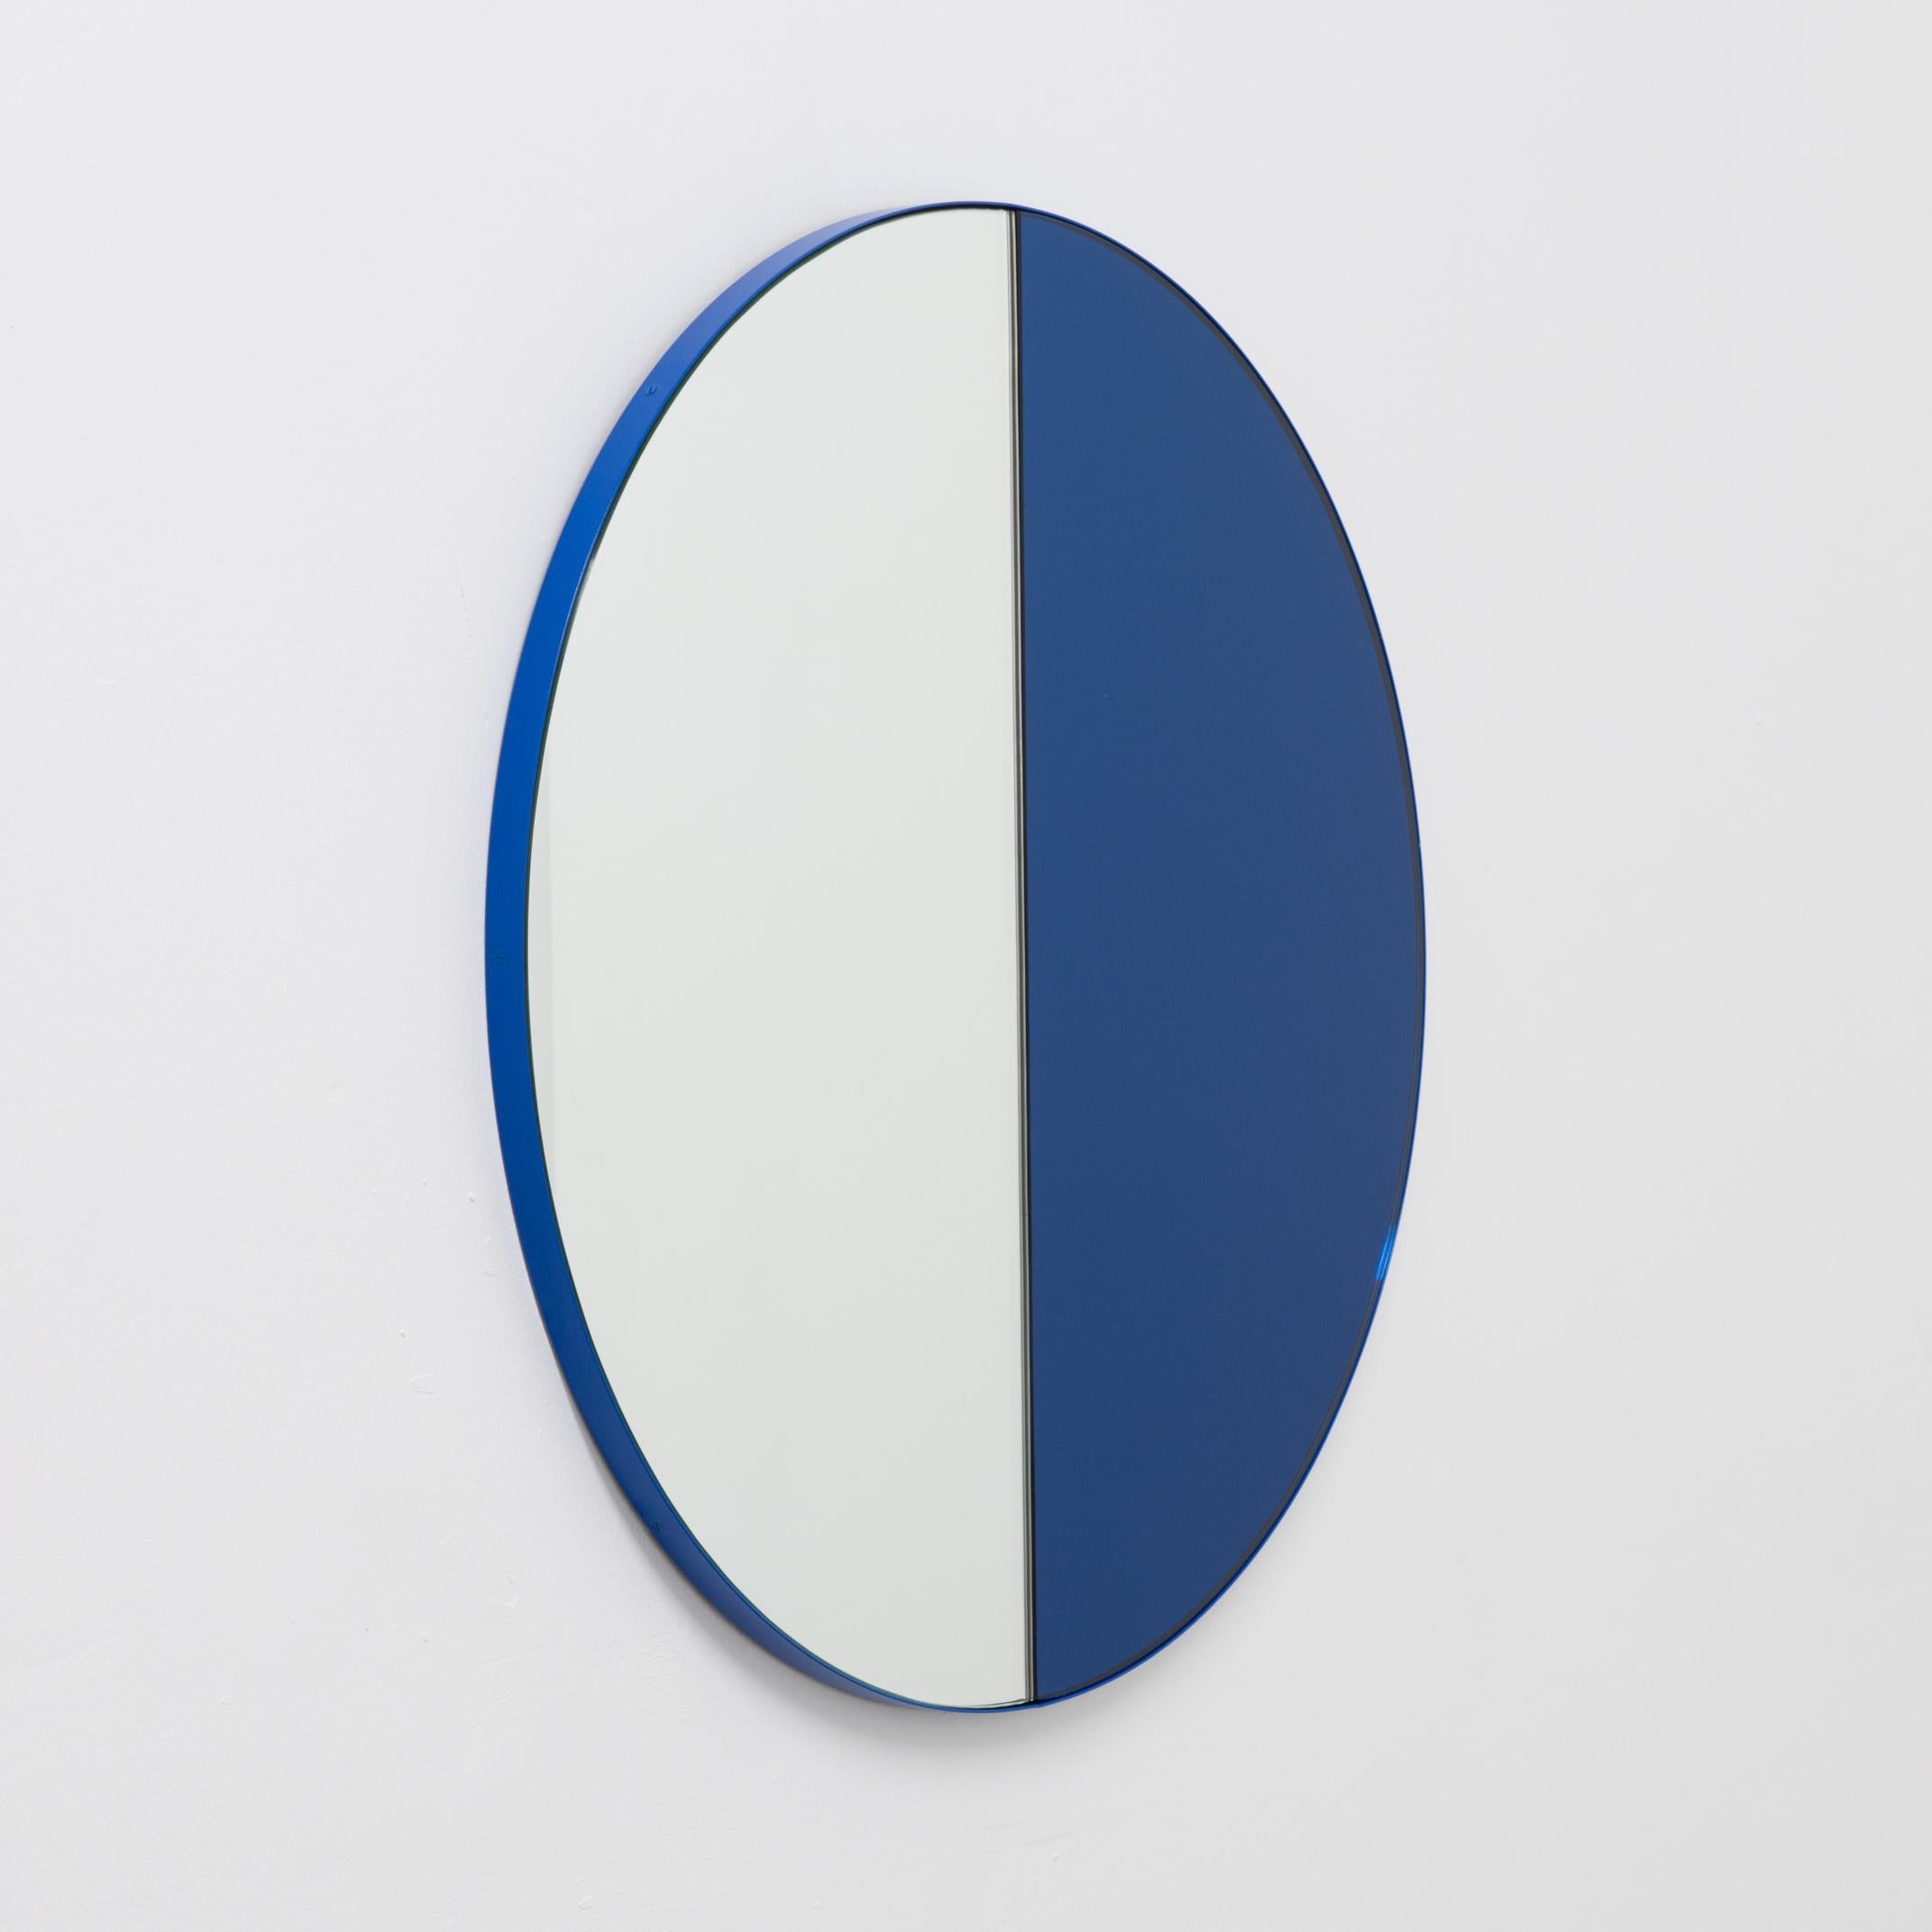 Powder-Coated Orbis Dualis Mixed Tint Blue and Silver Round Mirror with Blue Frame, Regular For Sale